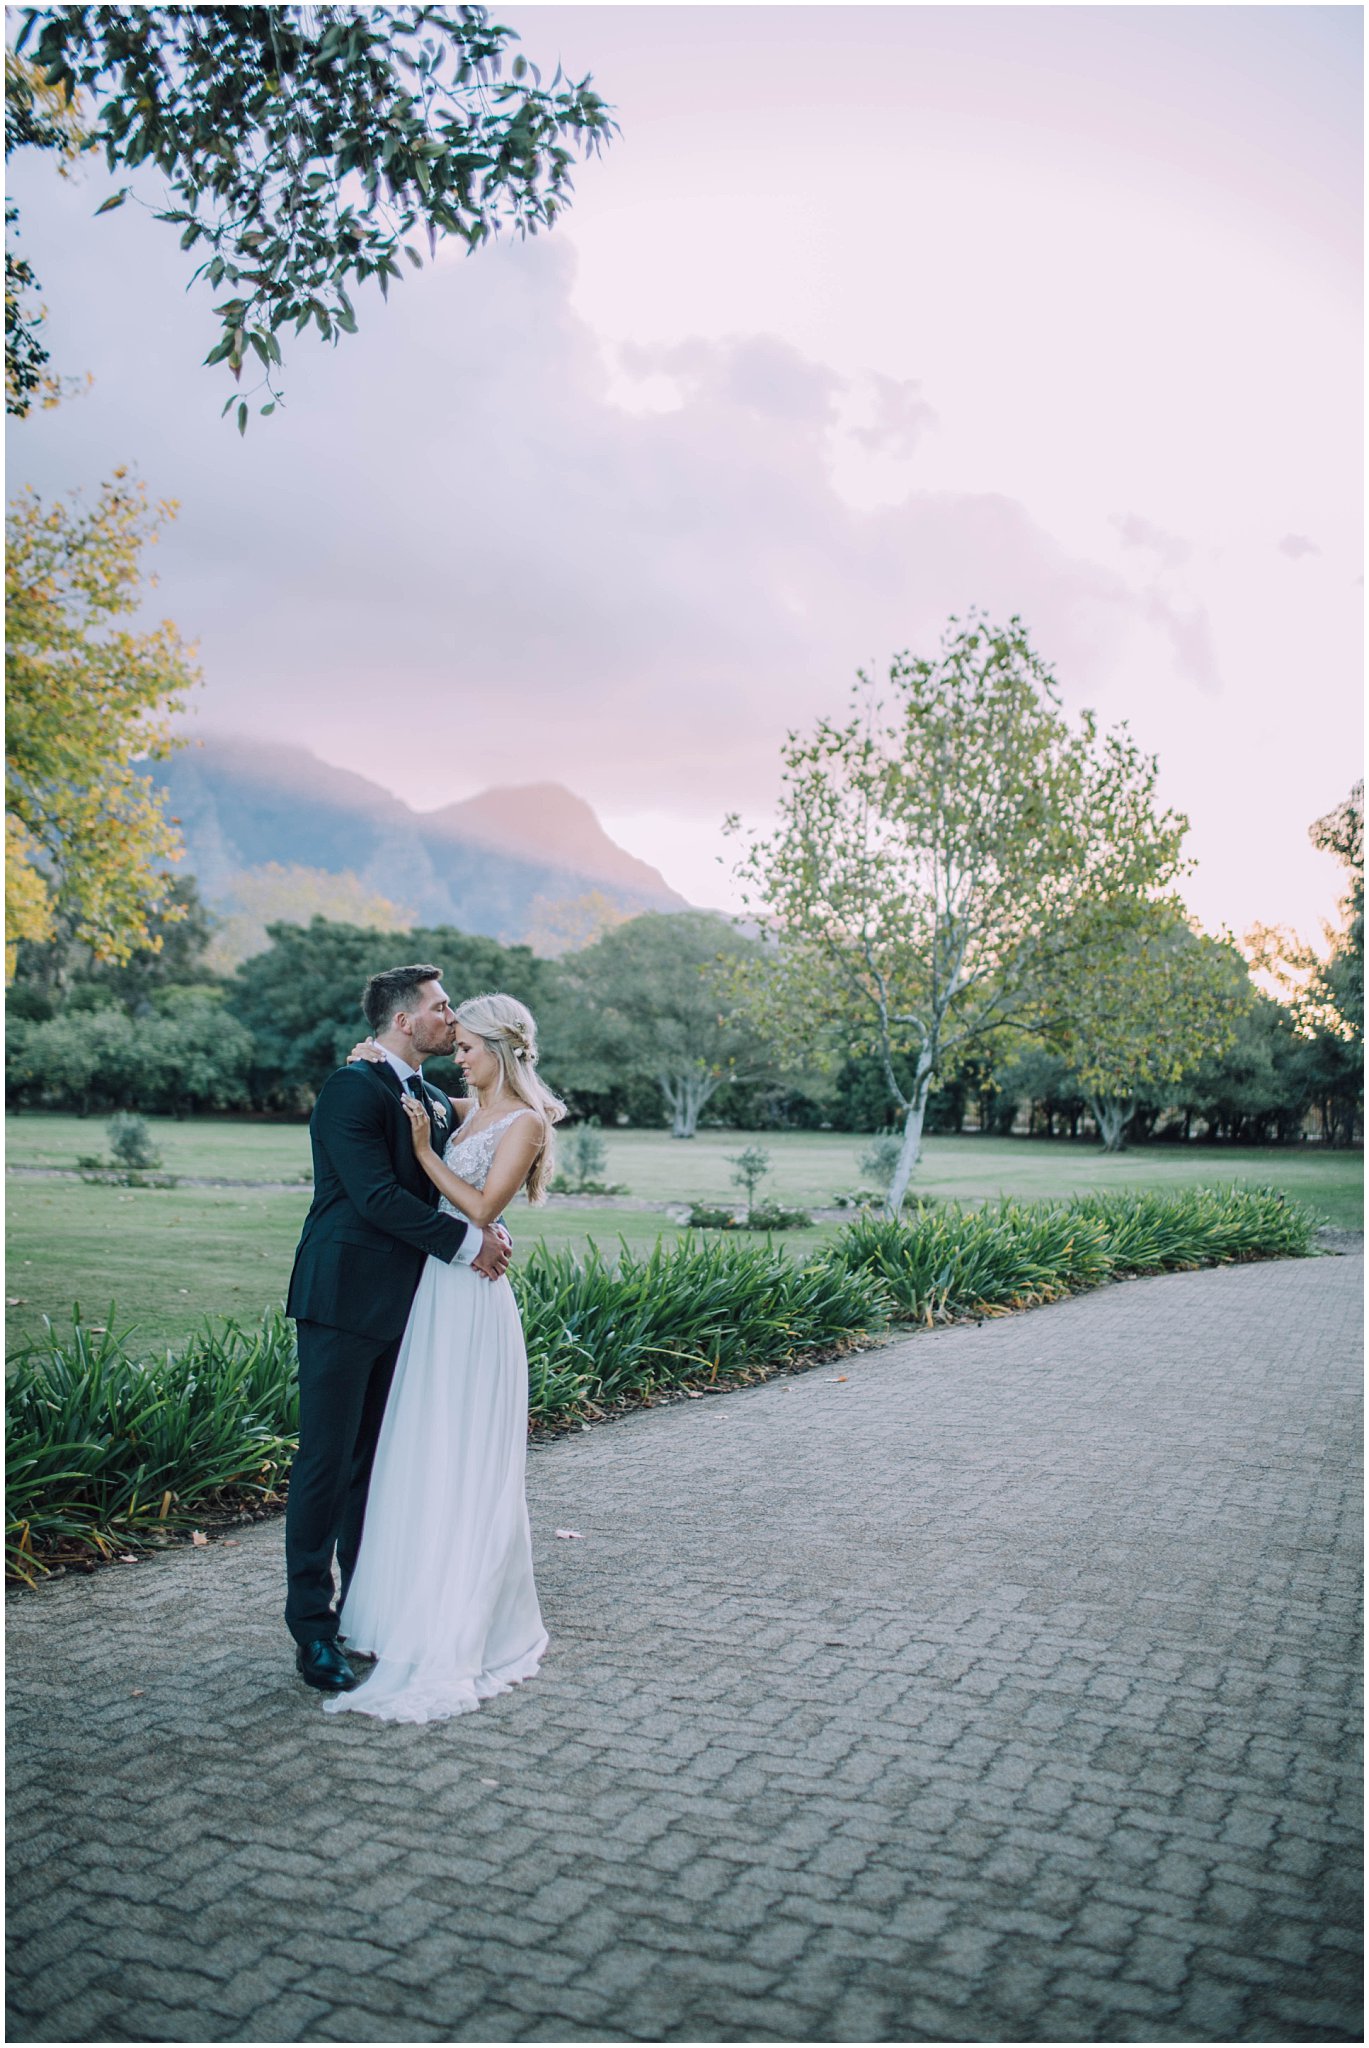 Ronel Kruger Cape Town Wedding and Lifestyle Photographer_2583.jpg